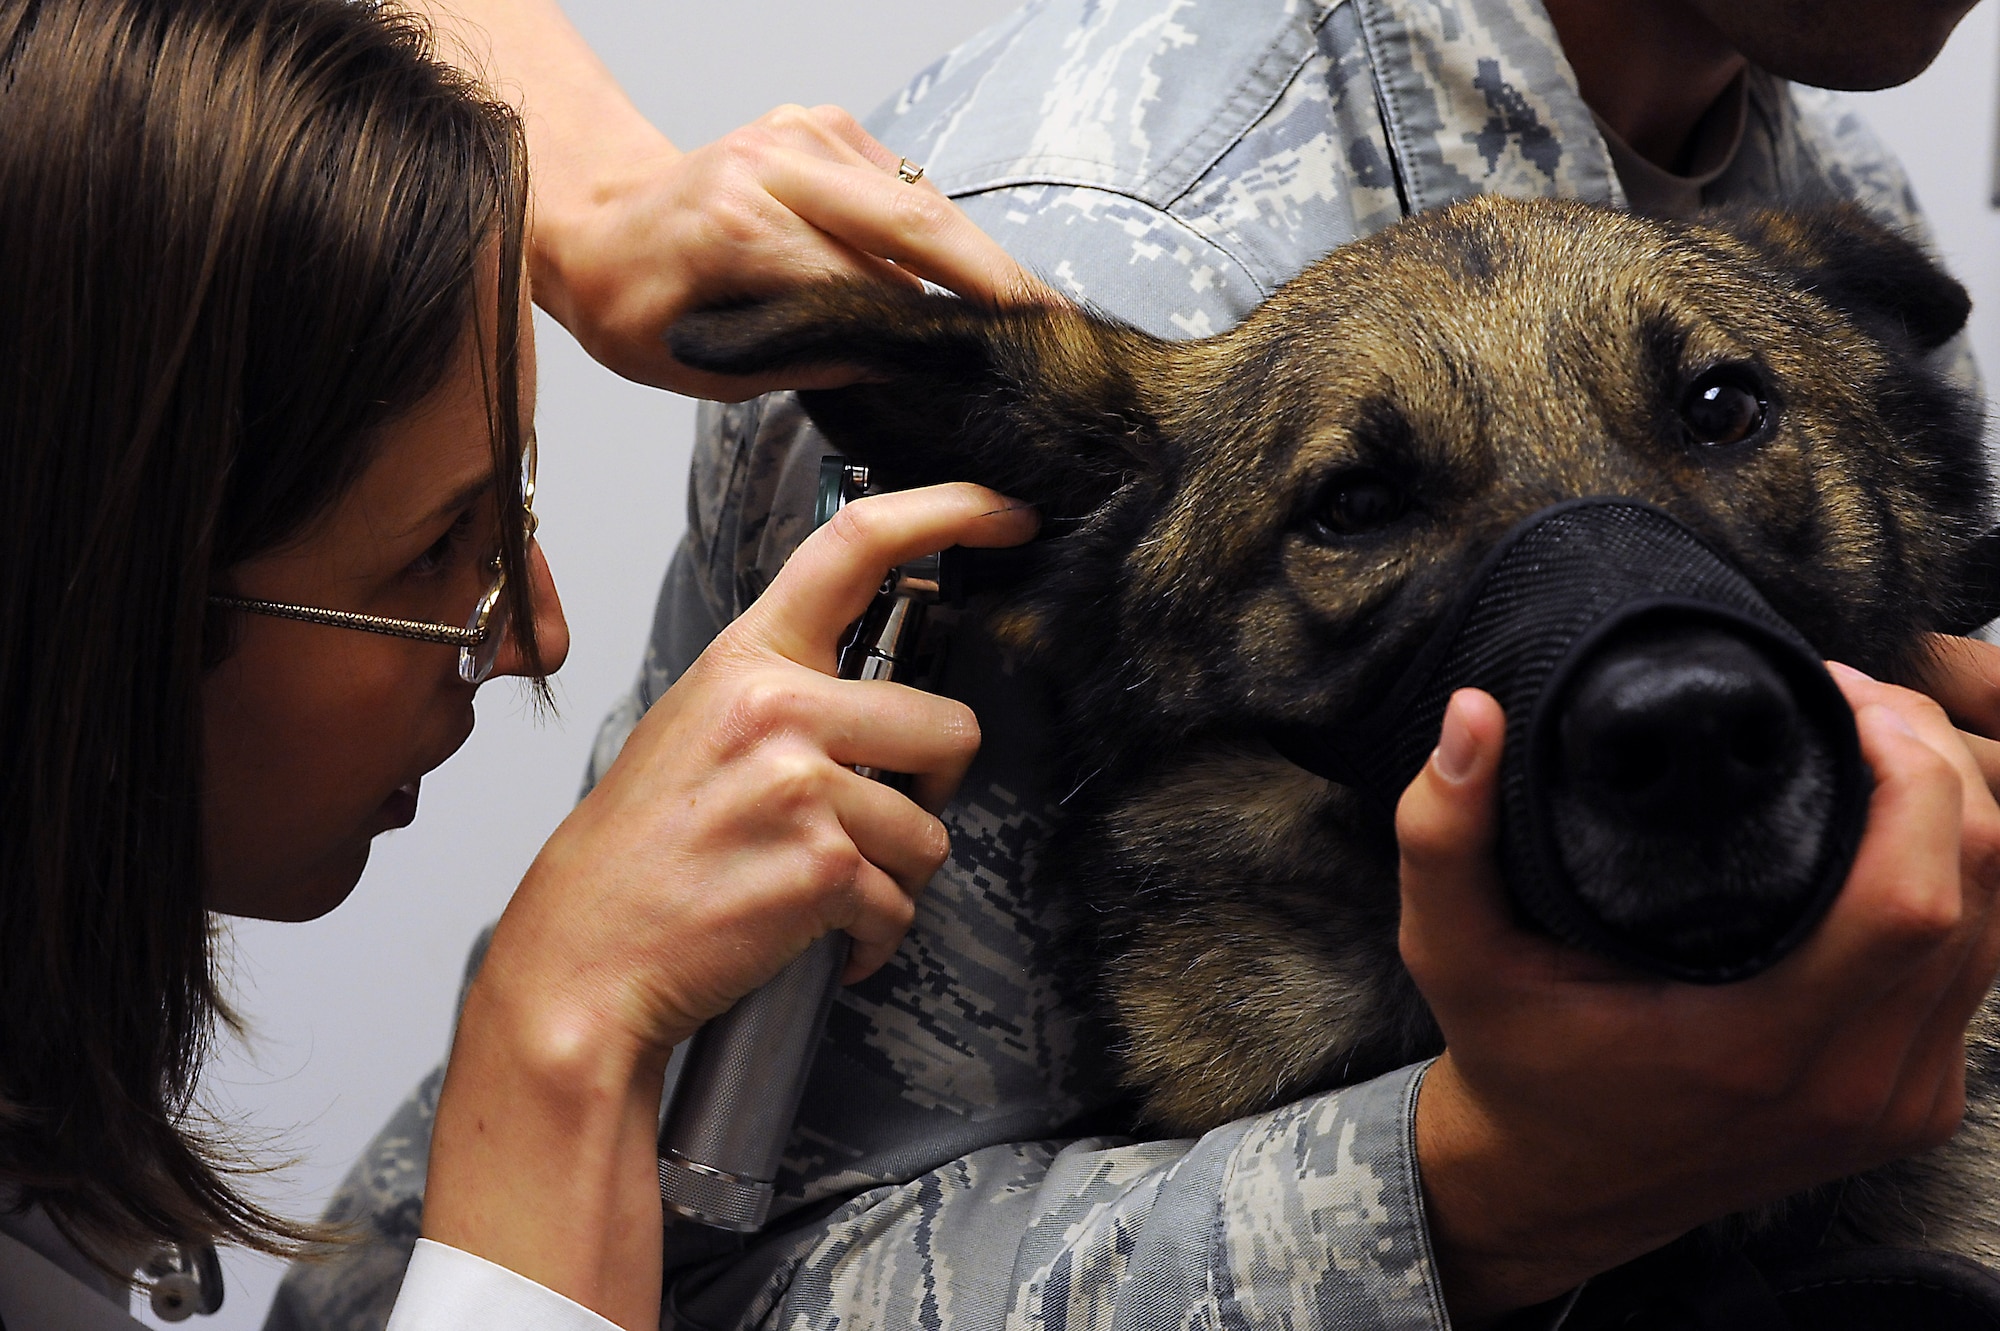 Joanna Kuecker, Army Public Health Command District-Carson veterinarian, examines the ear of Norbo, a 509th Security Forces Squadron military working dog, at Whiteman Air Force Base, Mo., July 3, 2013. Norbo is a narcotics and patrol dog who suffers from allergies. (U.S. Air Force photo by Airman 1st Class Shelby R. Orozco/Released)